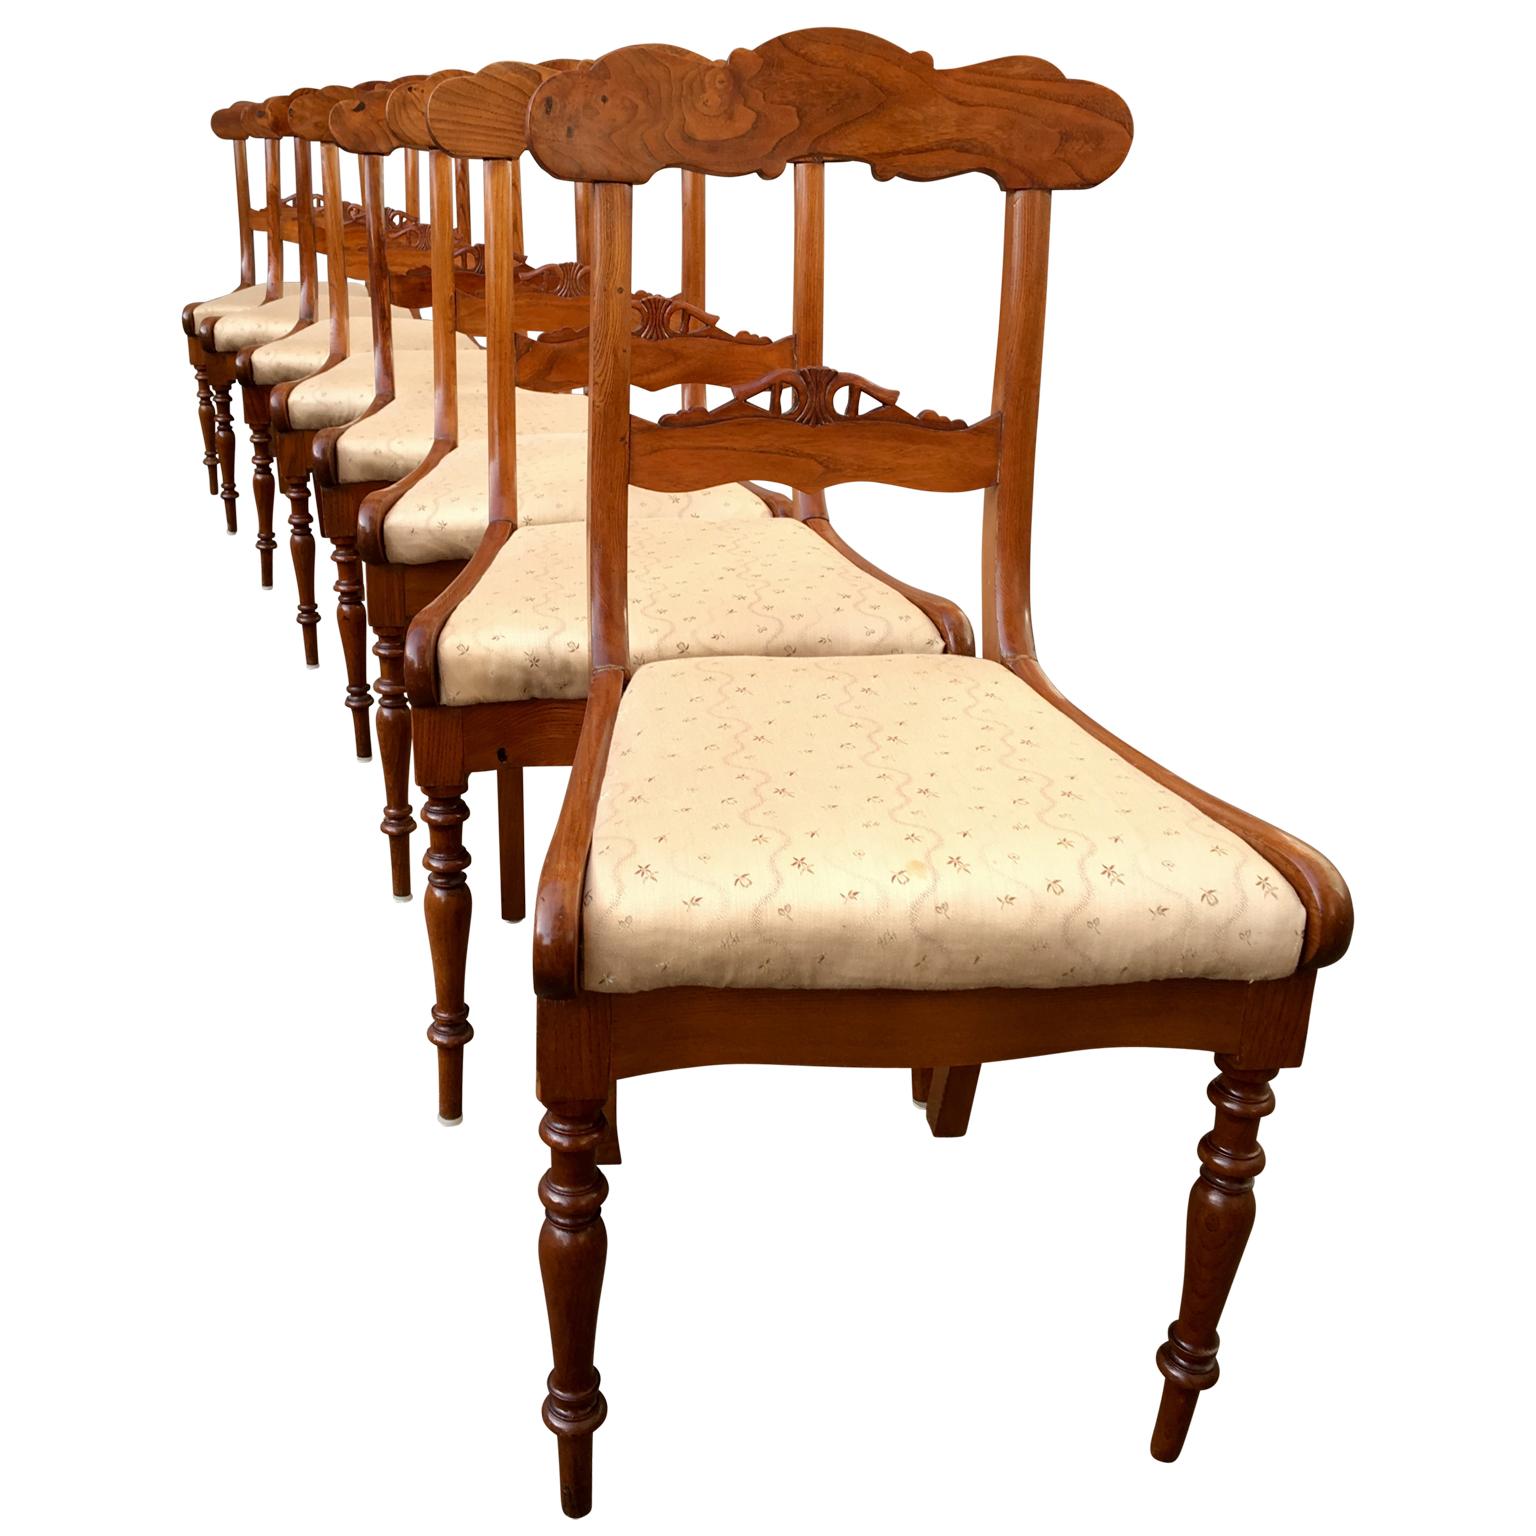 Set of 8 Swedish Biedermeier flaming tiger elm wood dining room chairs.
Original removable sits make it easier for next owner to provide its own chosen tissue on this Scandinavian set of chairs.